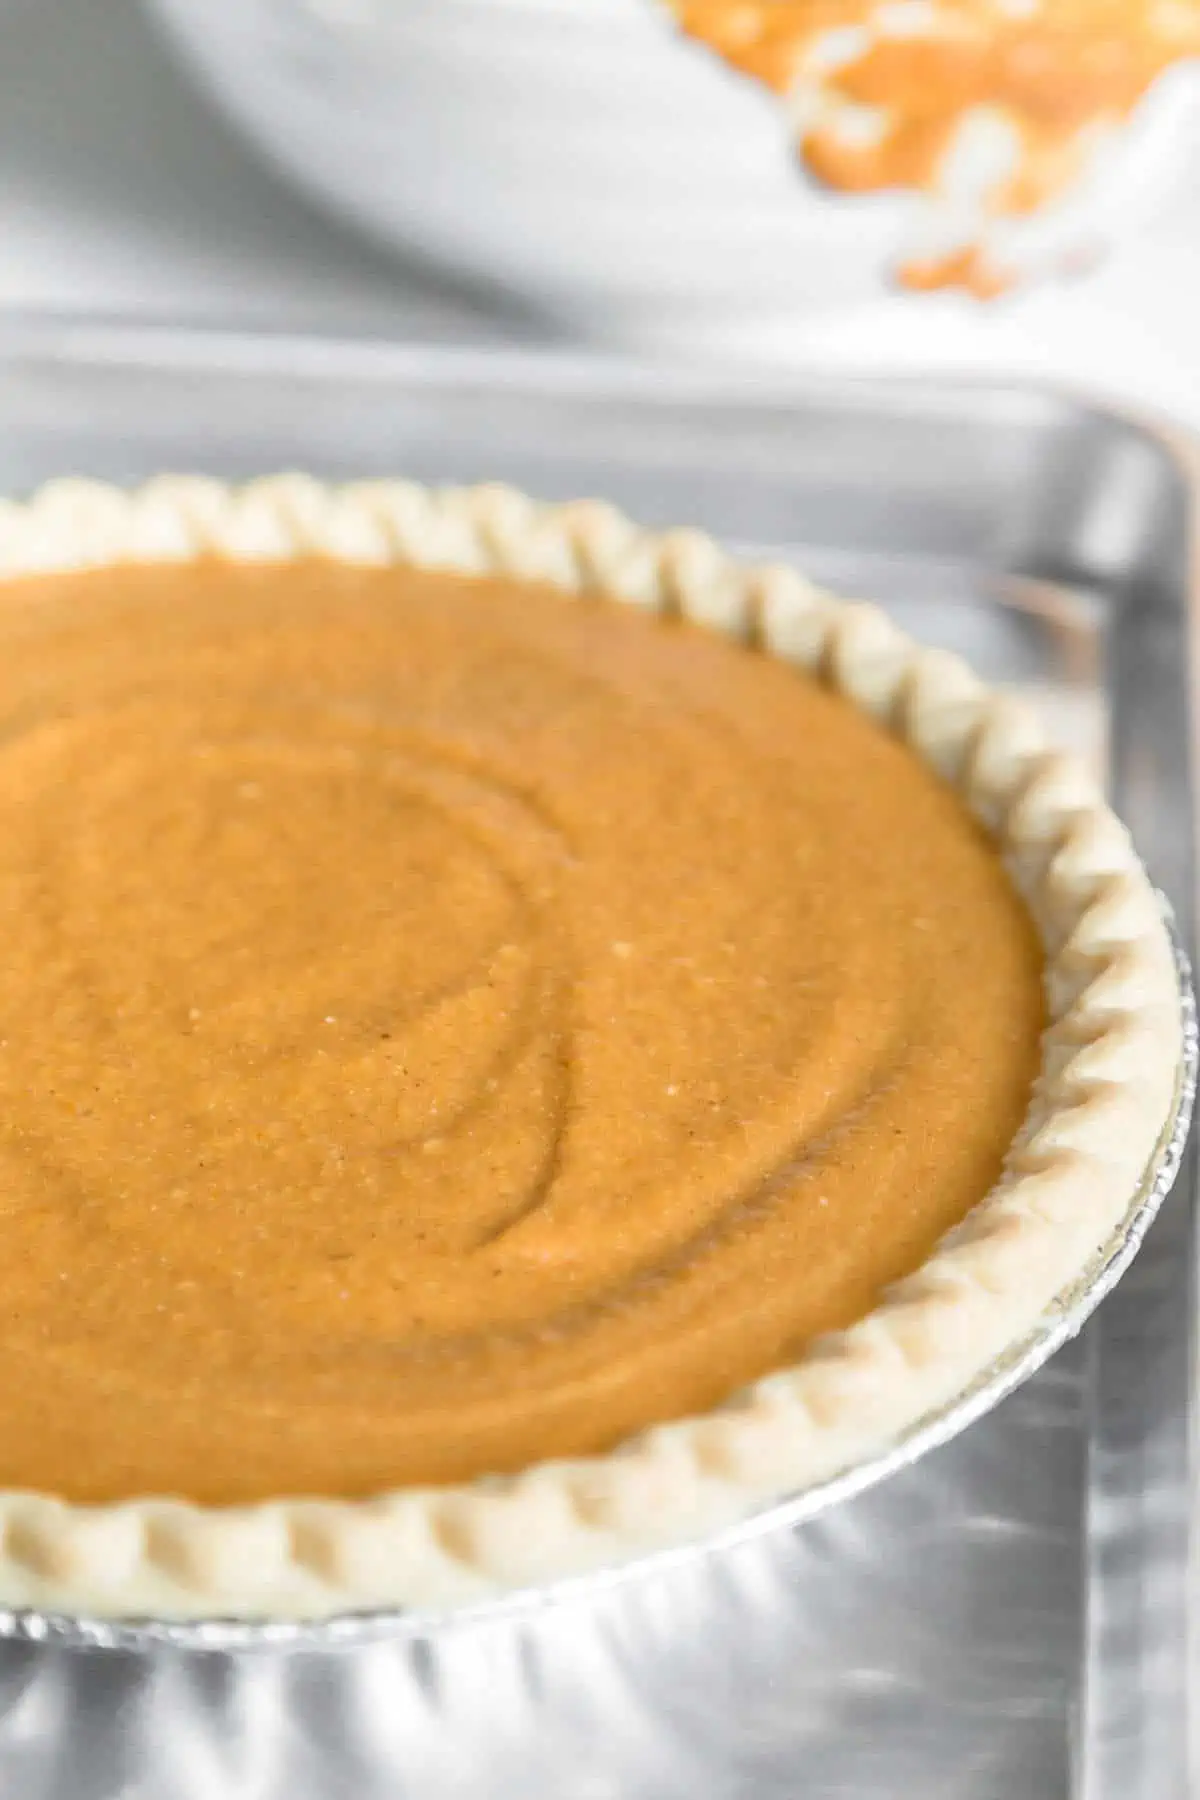 Vegan pumpkin pie filling mixed and poured into the prepared pie crust.